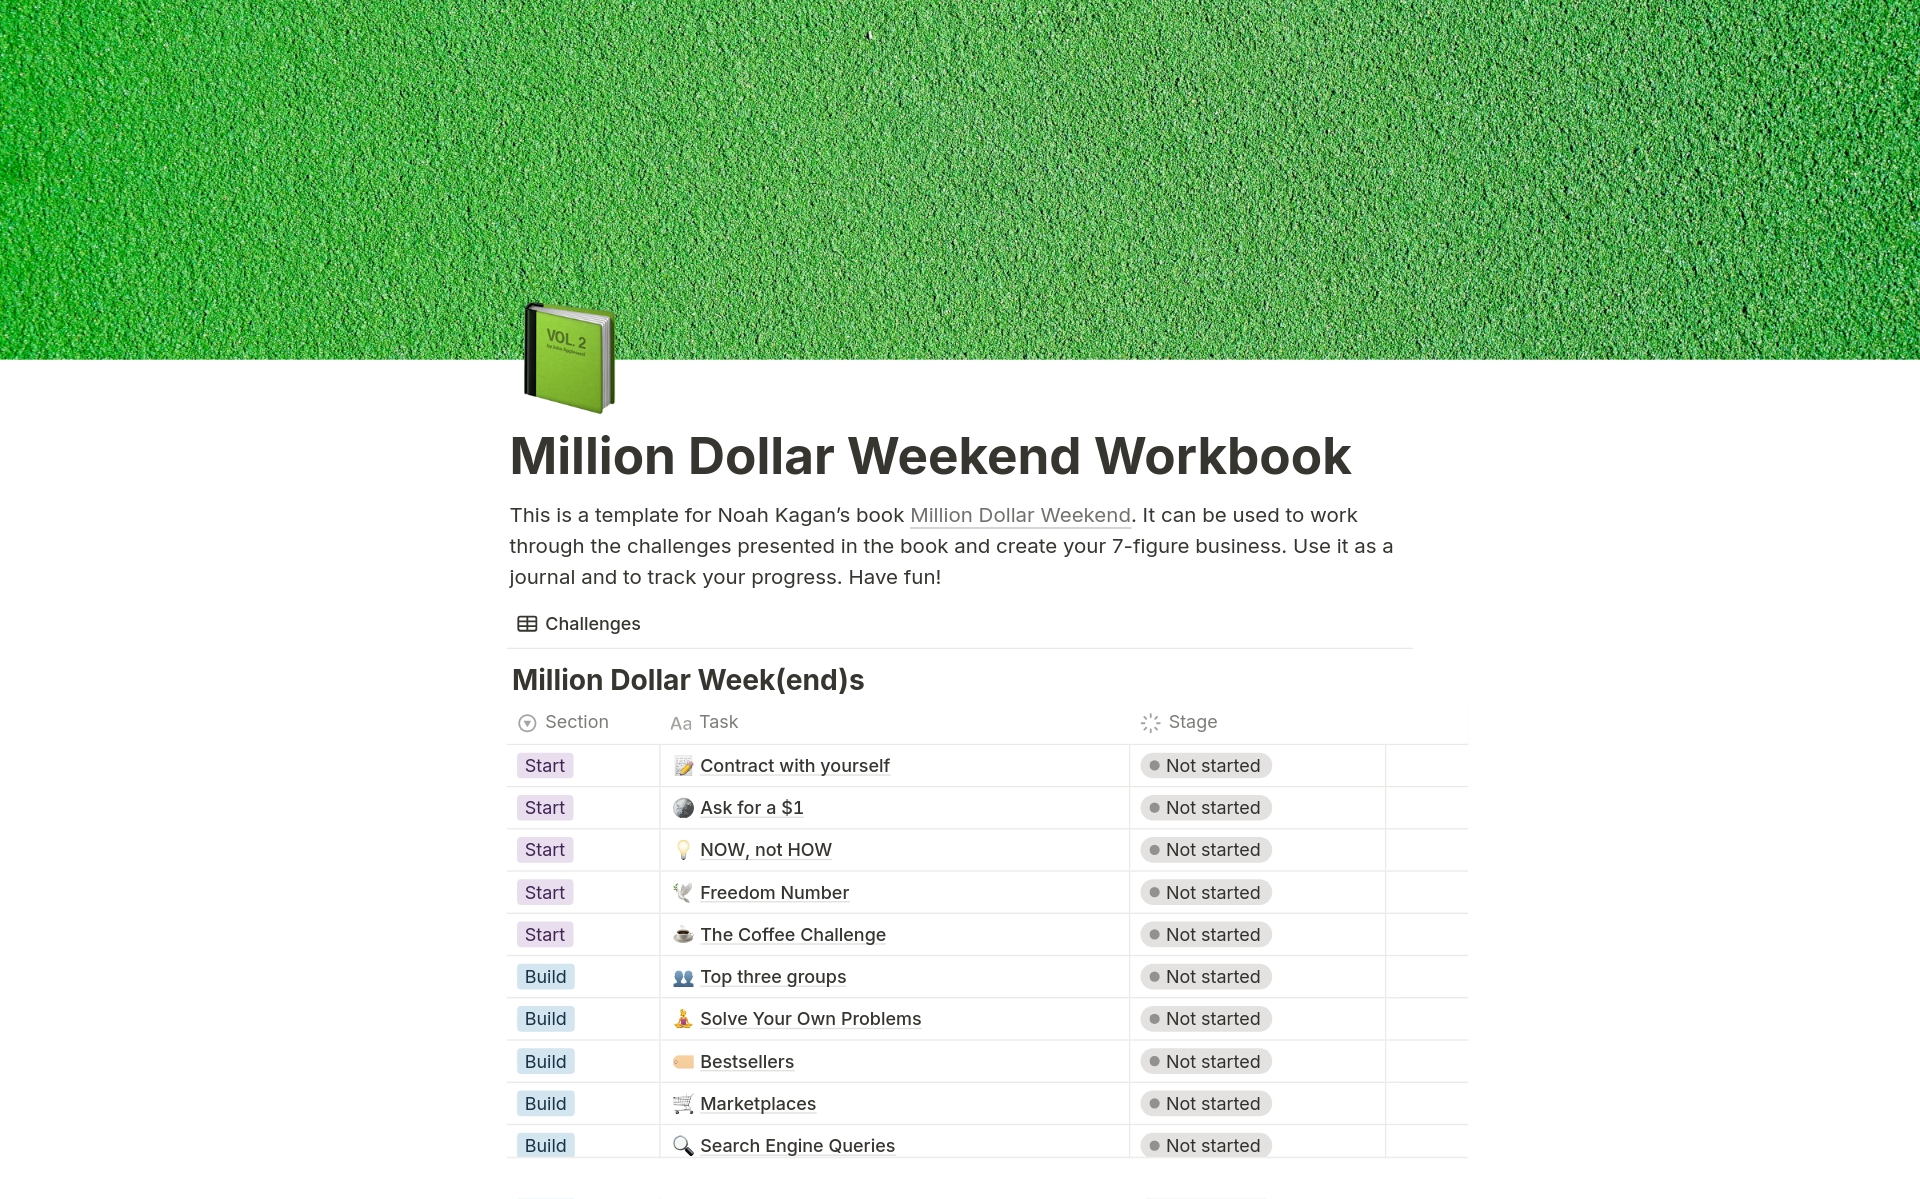 A template preview for Million Dollar Weekend Workbook